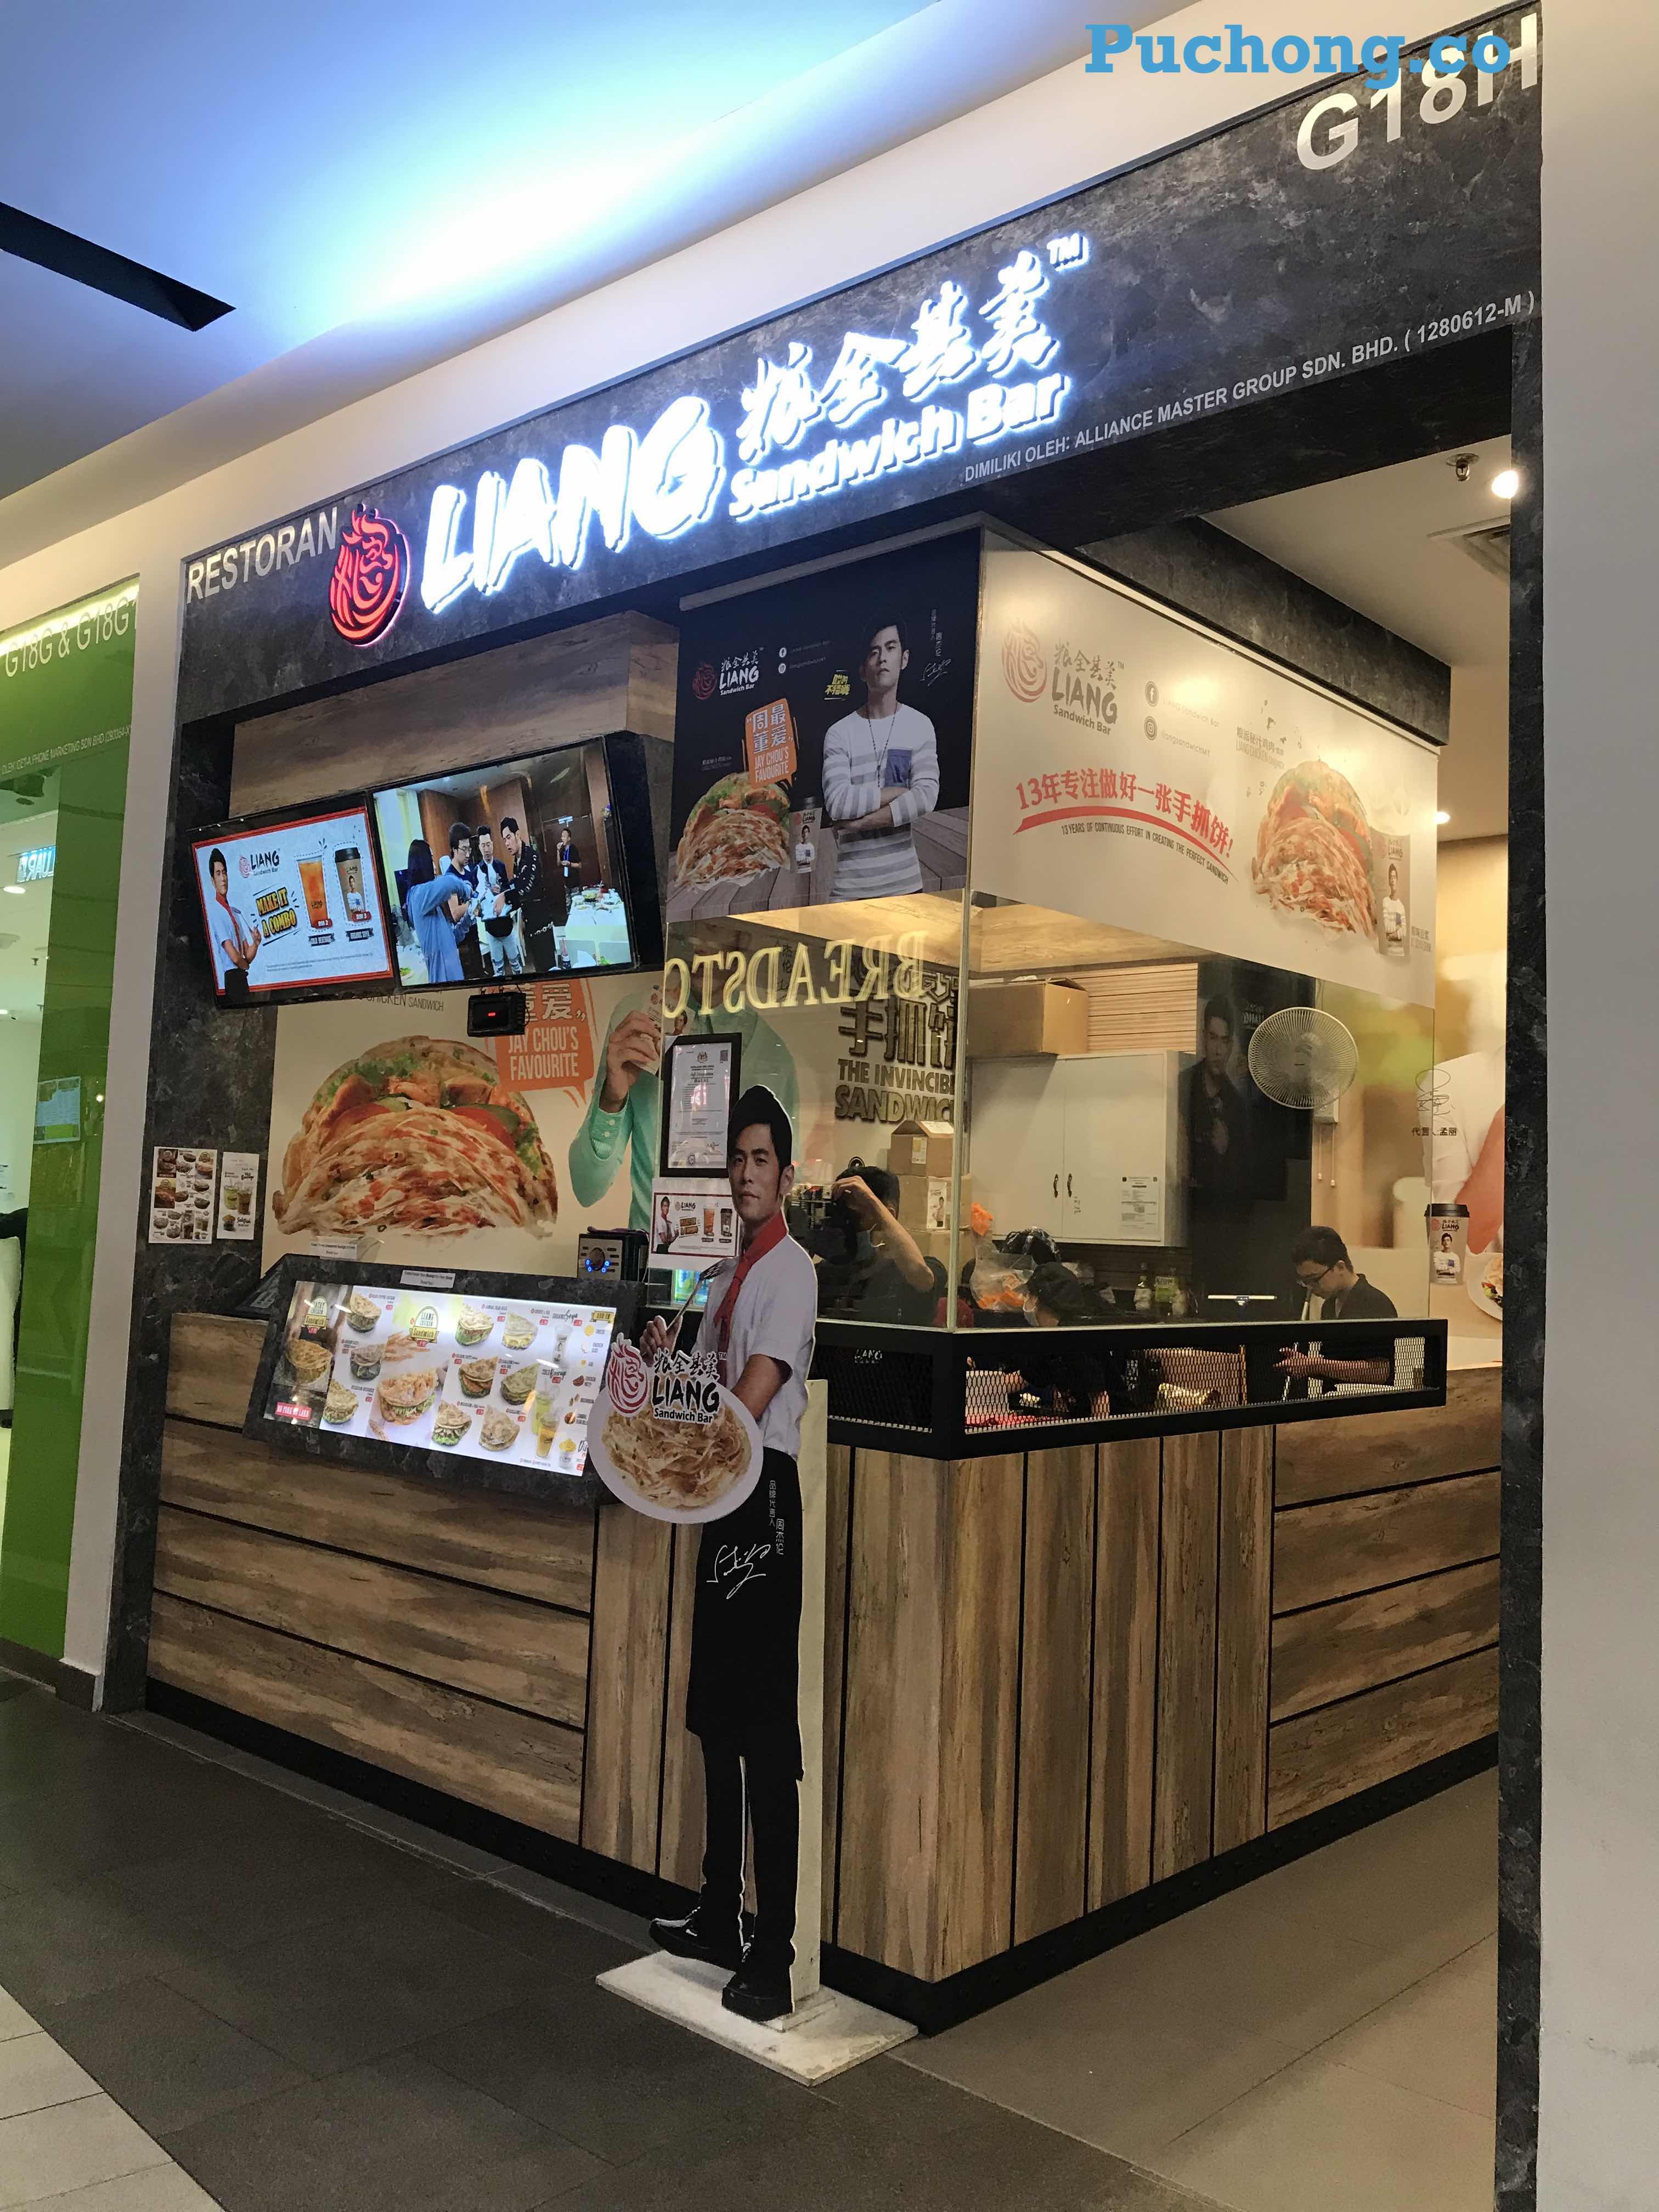 New Food & Beverage Franchise Opened in IOI Mall Puchong ...